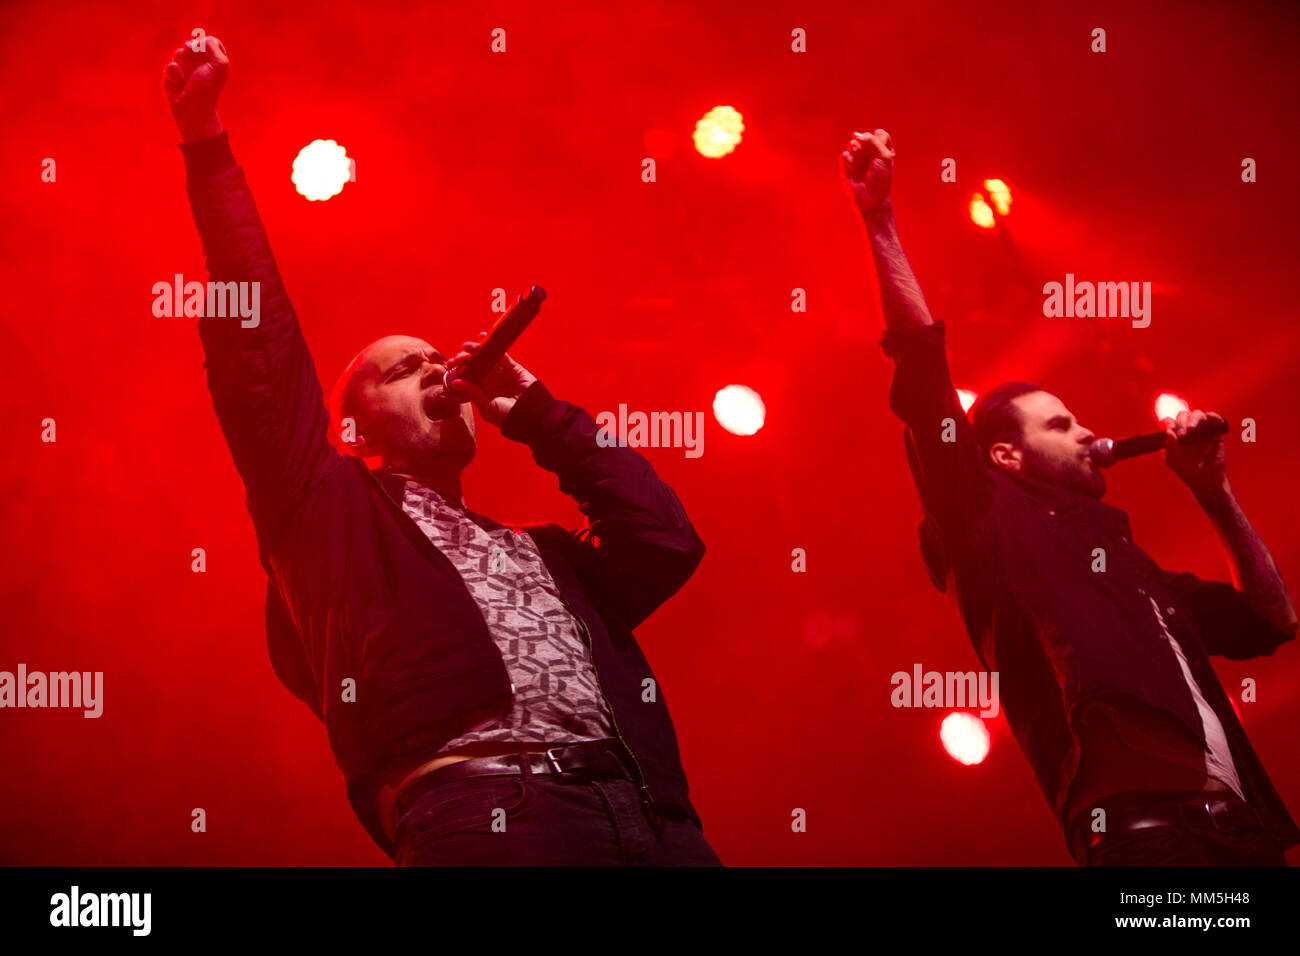 Norway, Bergen - April 30, 2018. The English boy band Five performs a live concert during the We Love the 90’s show at Bergenshallen in Bergen. Here singers Sean Conlon (L) and Scott Robinson (R) are seen live on stage. (Photo credit: Gonzales Photo - Jarle H. Moe). Stock Photo